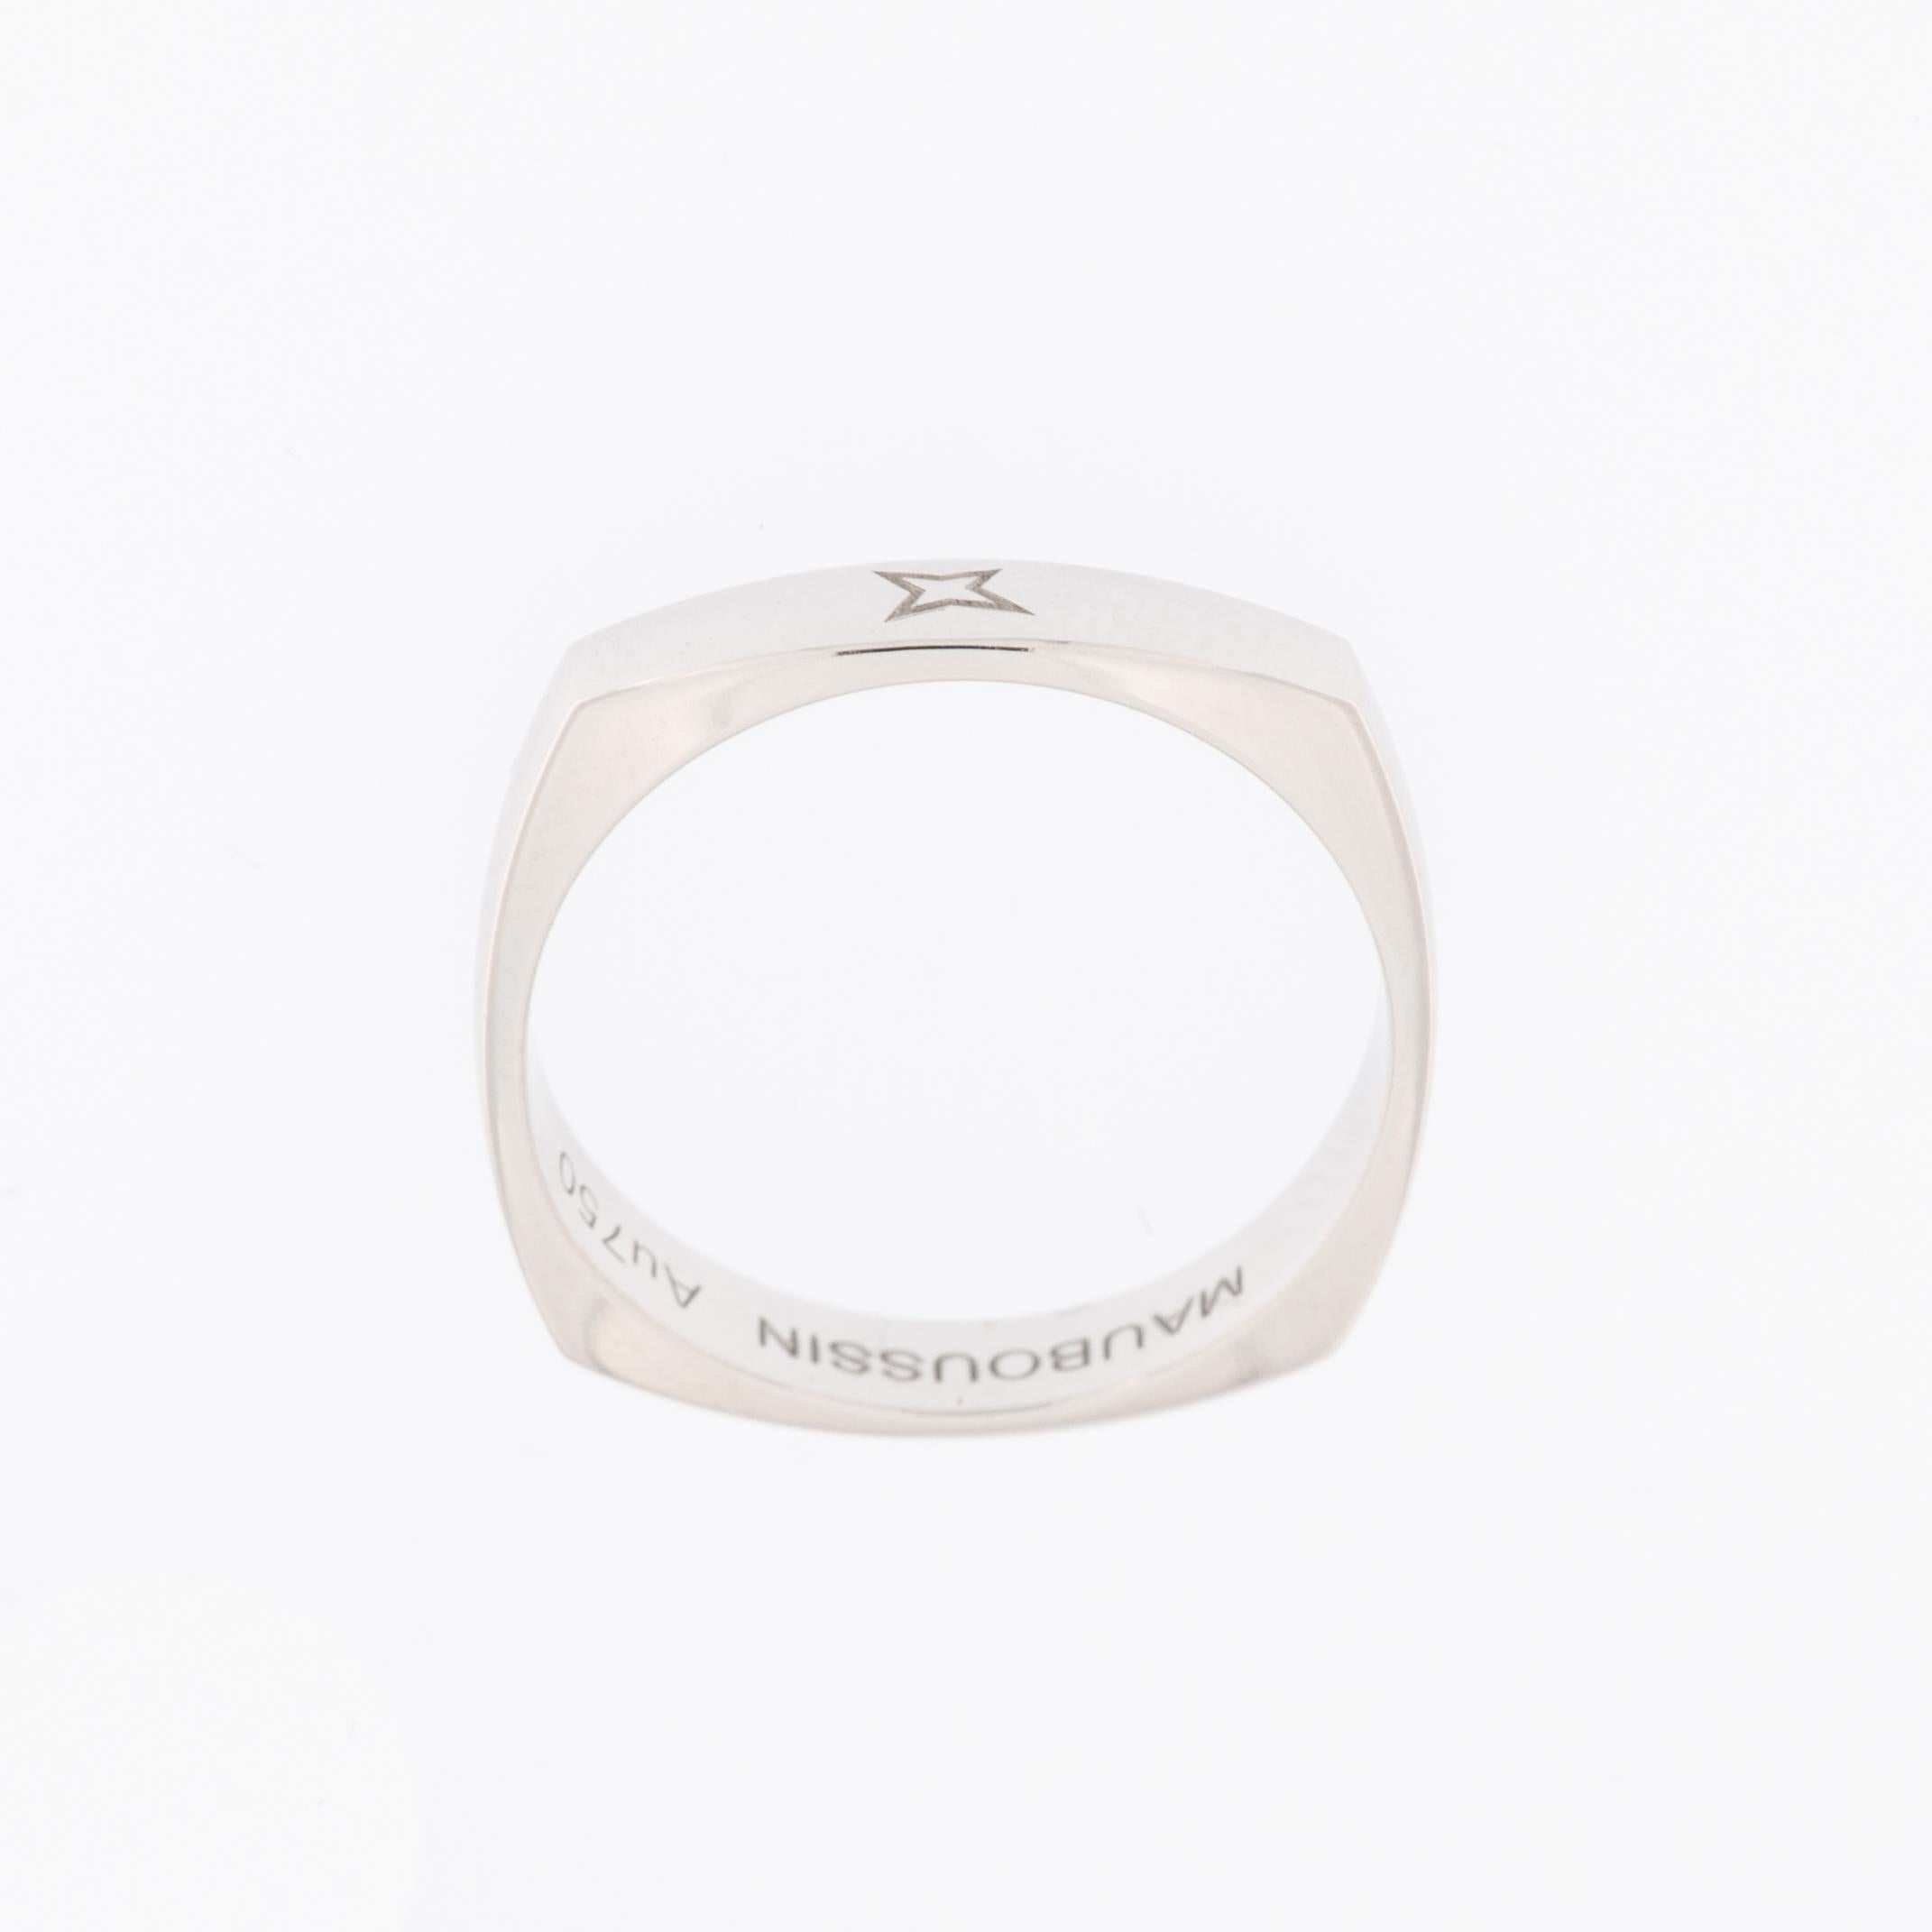 The Mauboussin 18-karat White Gold Band Ring is a symbol of refined luxury and timeless elegance. Crafted by the esteemed French jewelry house Mauboussin, this ring showcases a seamless blend of exquisite design and superior craftsmanship.

The band